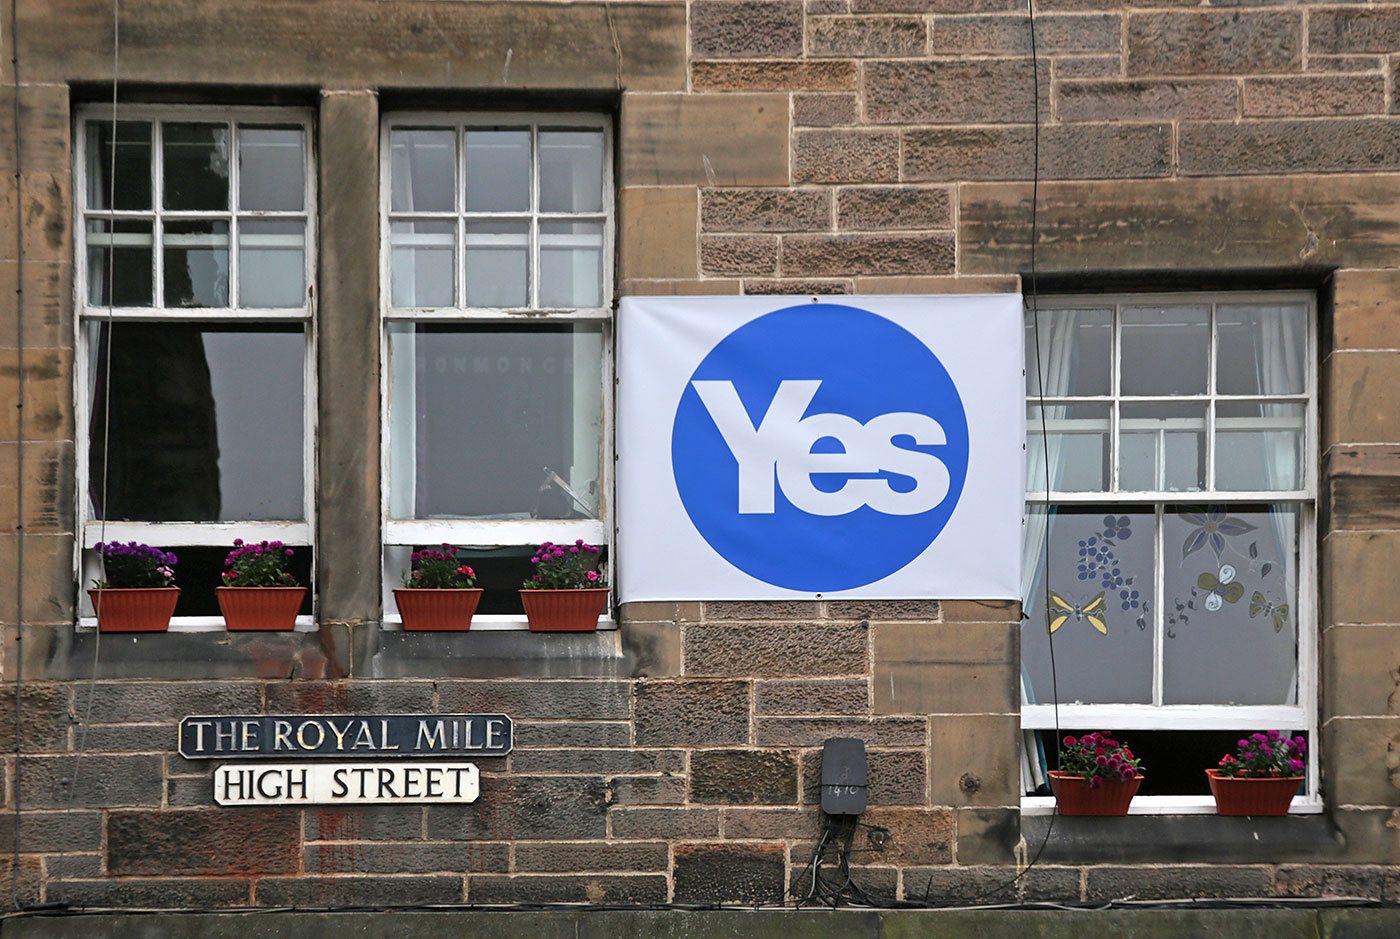 Photos taken in Edinburgh on voting day in the  Scottish Indepemdence Referendum on 18 September 2014  -  The Royal Mile  -  A 'Yes' message on tenements in the High Street